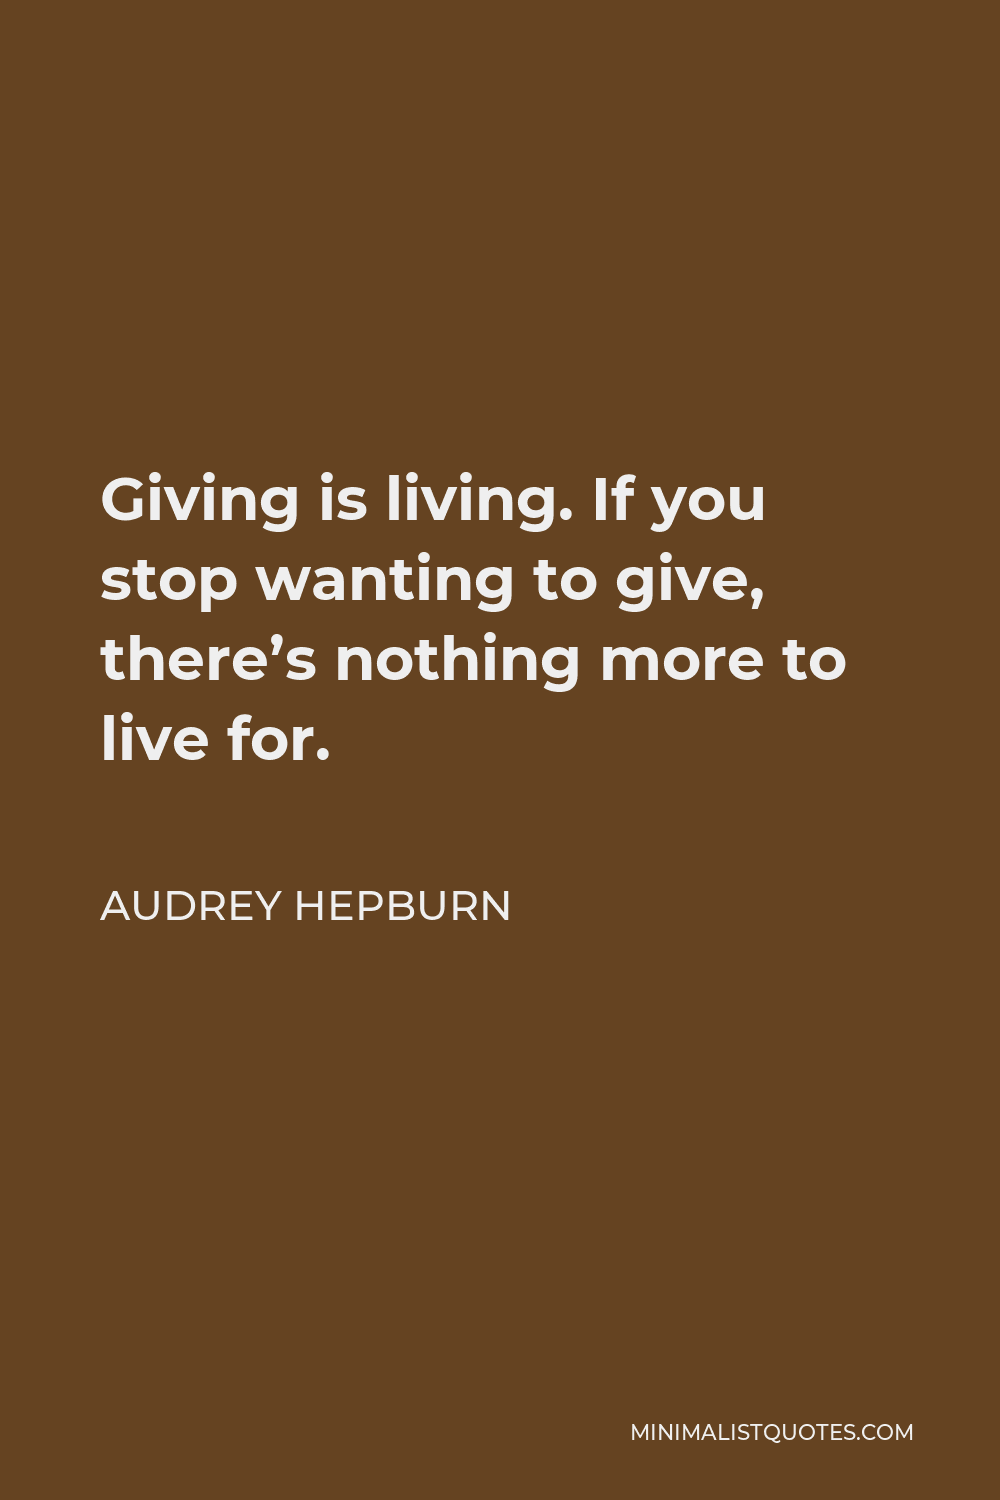 Audrey Hepburn Quote - Giving is living. If you stop wanting to give, there’s nothing more to live for.